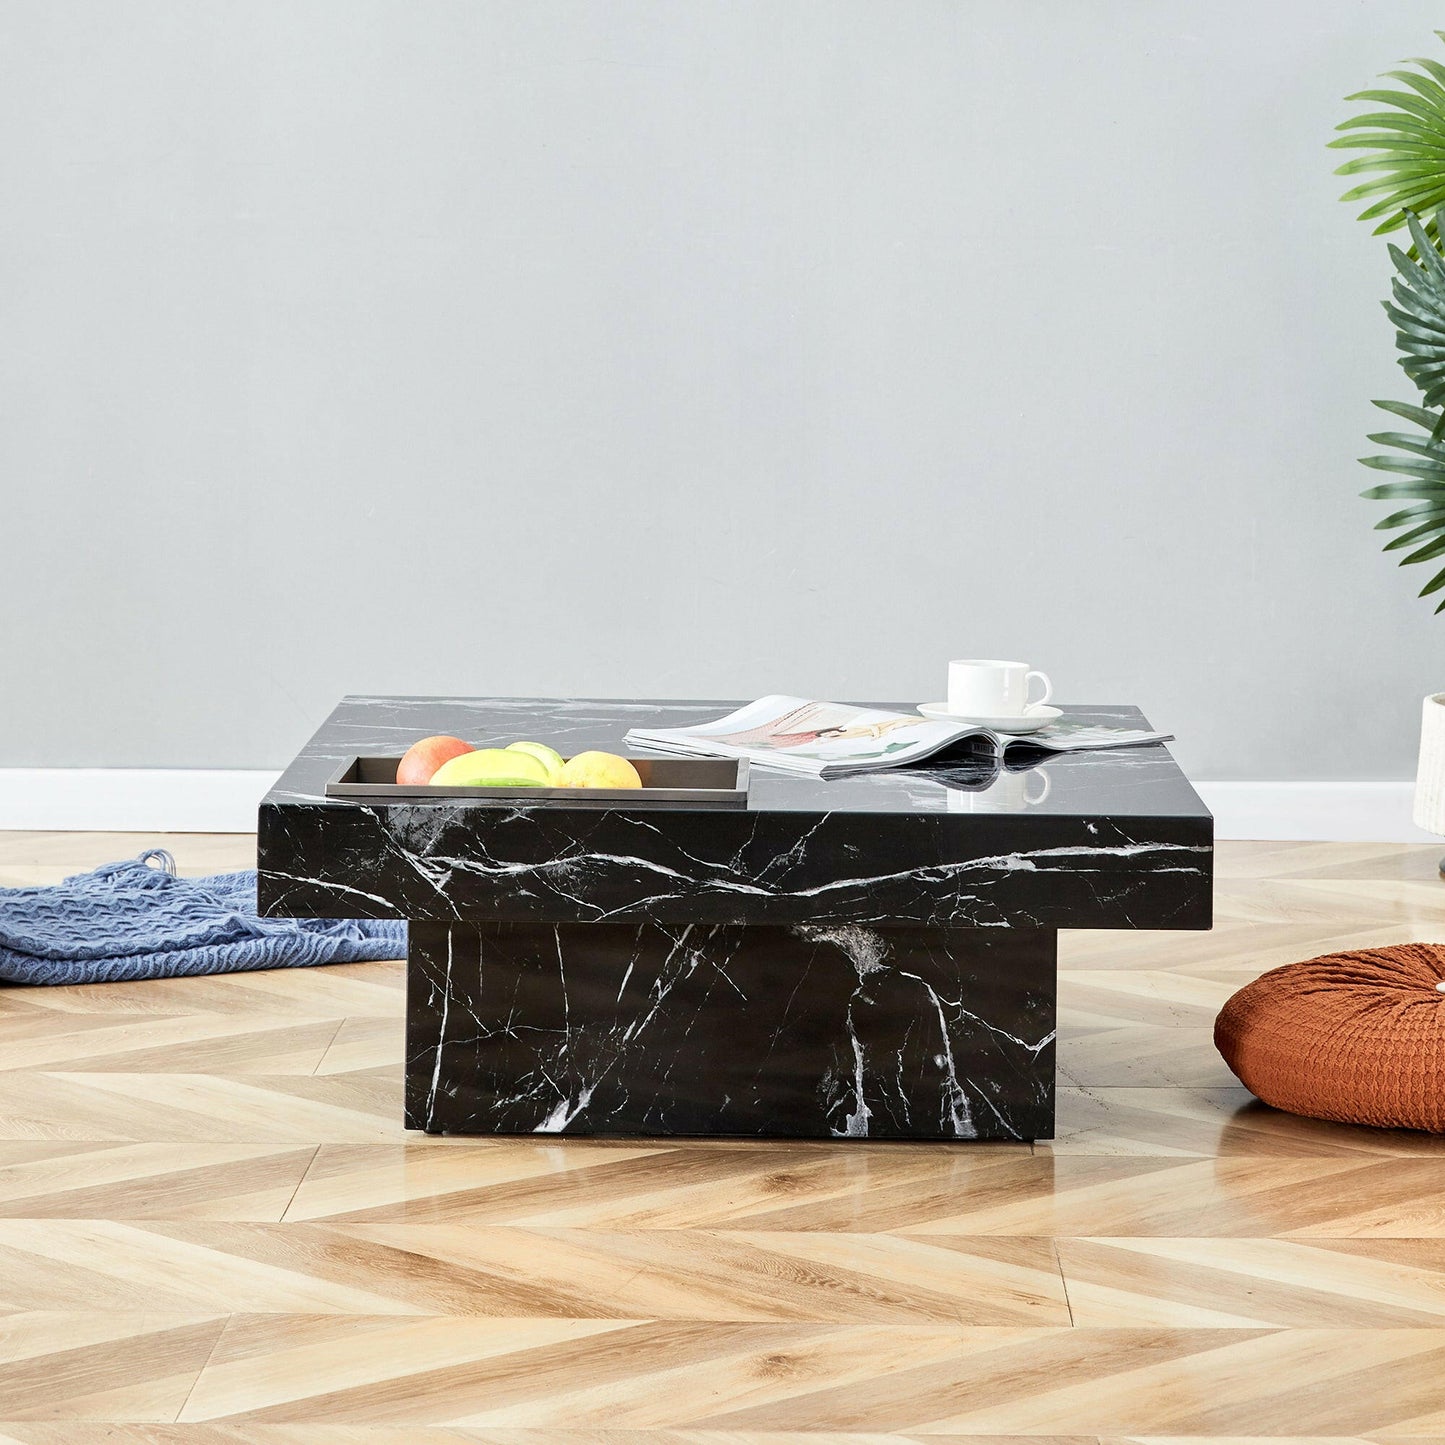 A modern and practical coffee table made of MDF material with black patterns